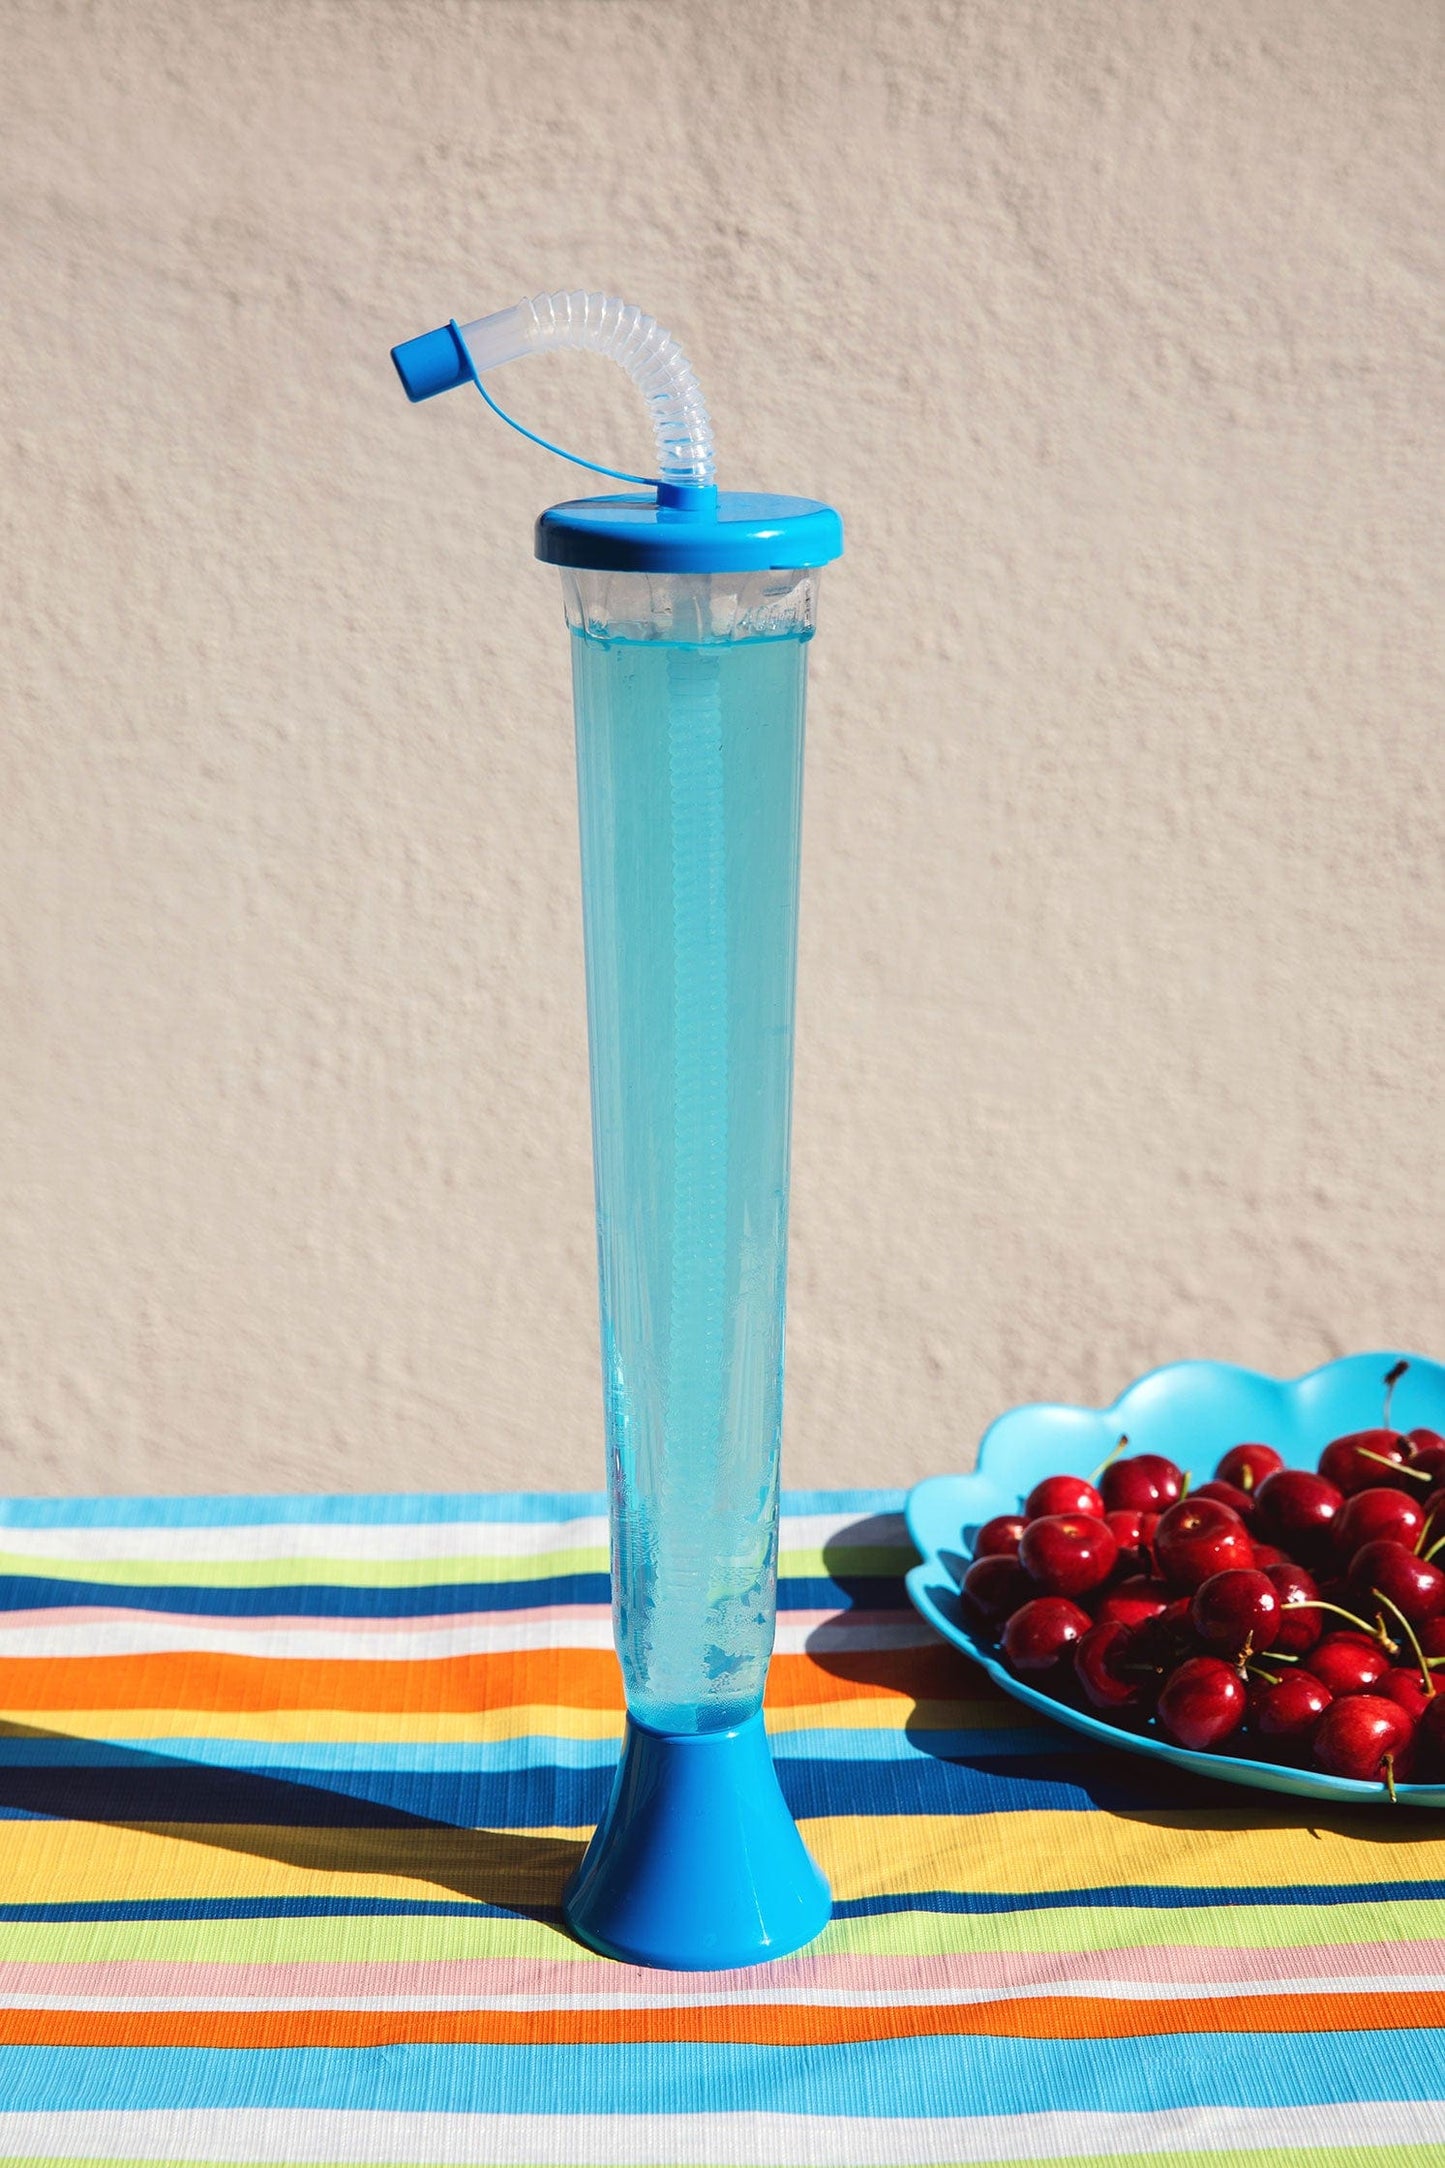 https://noveltycupsusa.com/cdn/shop/files/sweet-world-usa-yard-cups-54-or-108-cups-yard-cups-with-blue-lids-and-straws-14oz-for-margaritas-and-frozen-drinks-cups-with-lids-and-straws-36472424792223.jpg?v=1690918166&width=1445